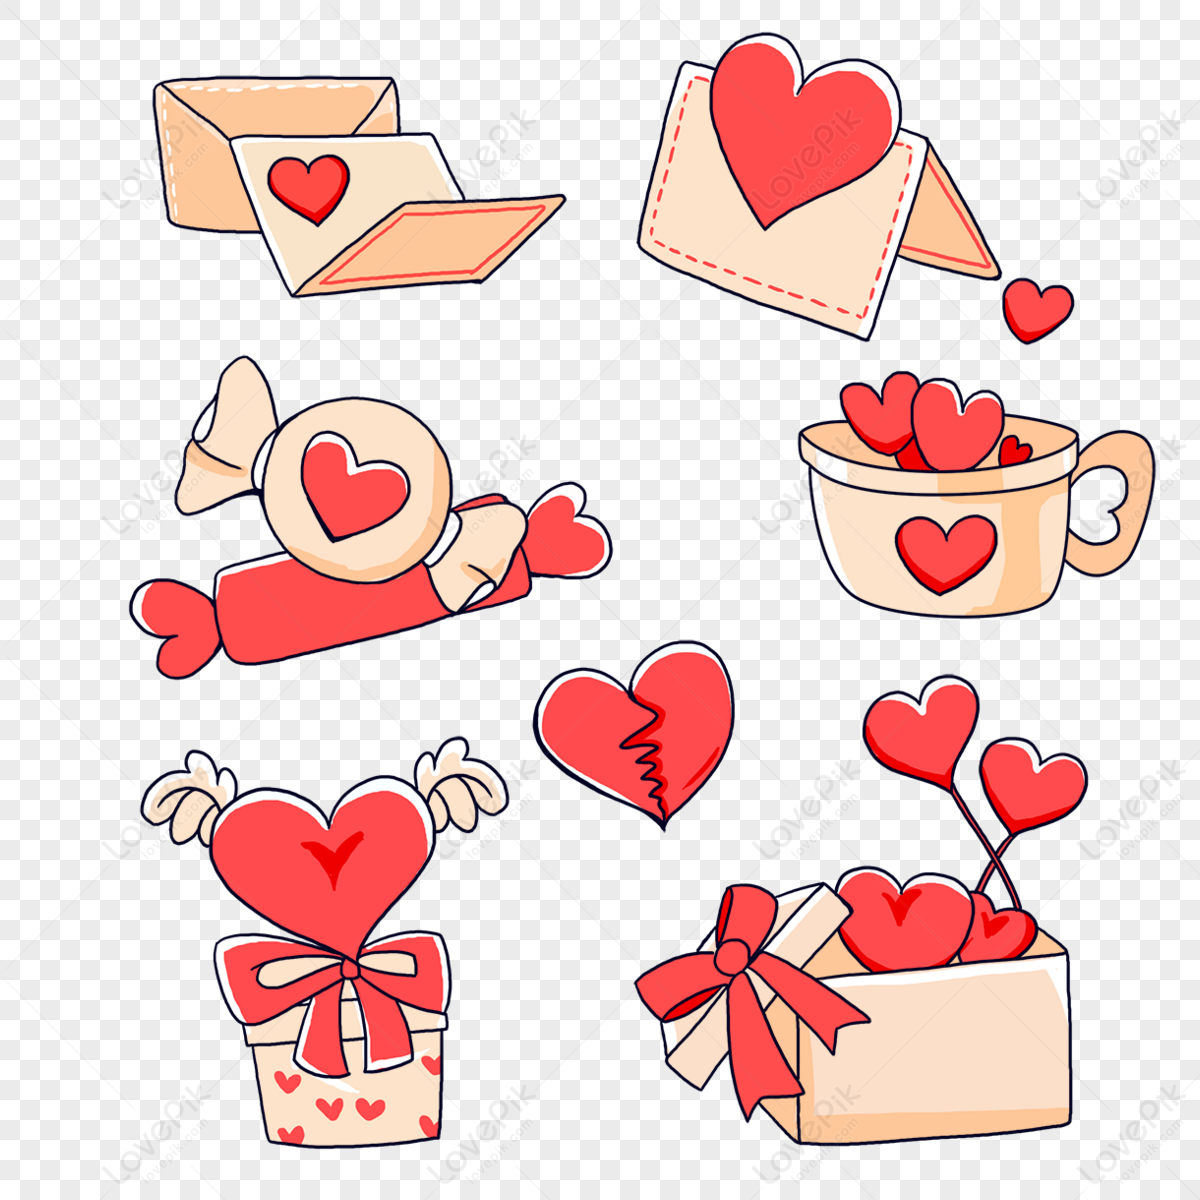 Love Letter Clipart Transparent PNG Hd, Love Letter Cartoon, Cream Love  Letter, Valentine Day Latter, Love PNG Image For Free Download